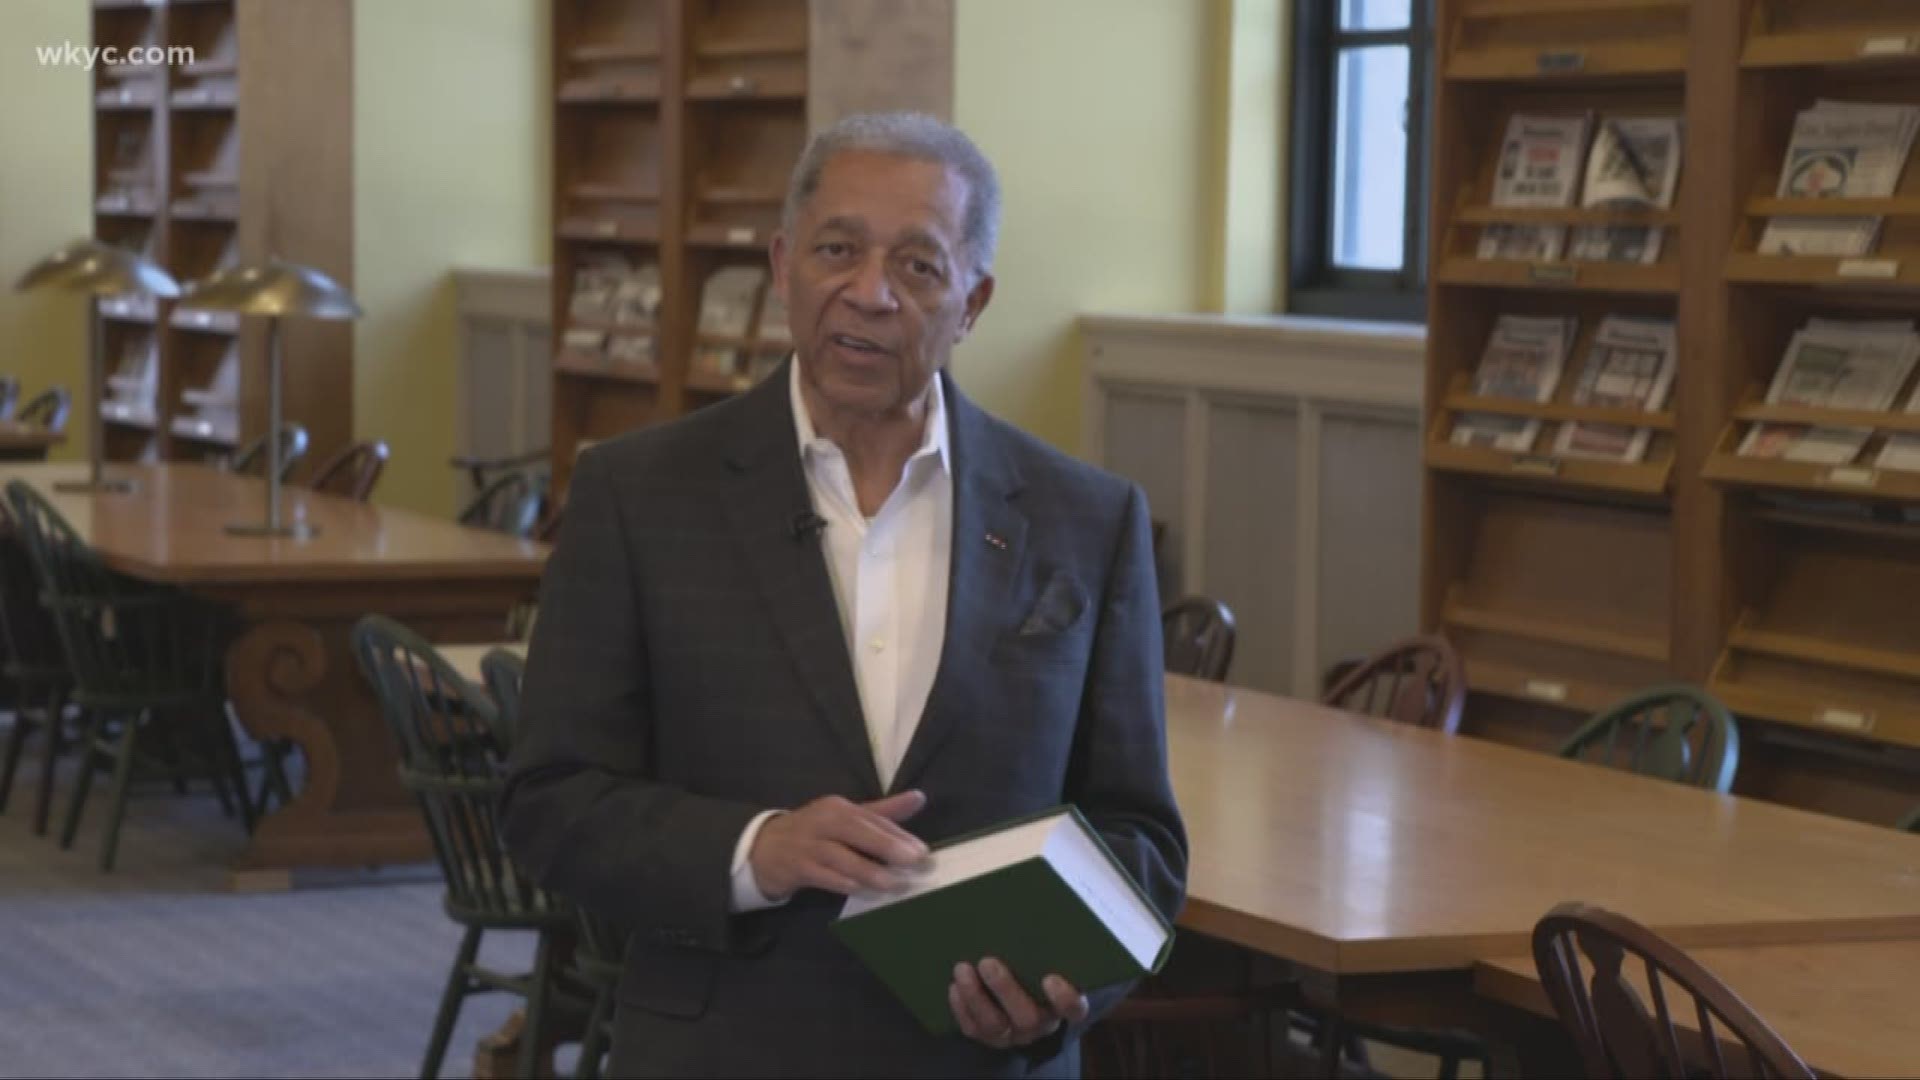 Leon Bibb takes a look at how this cornerstone of the community has changed with the time.